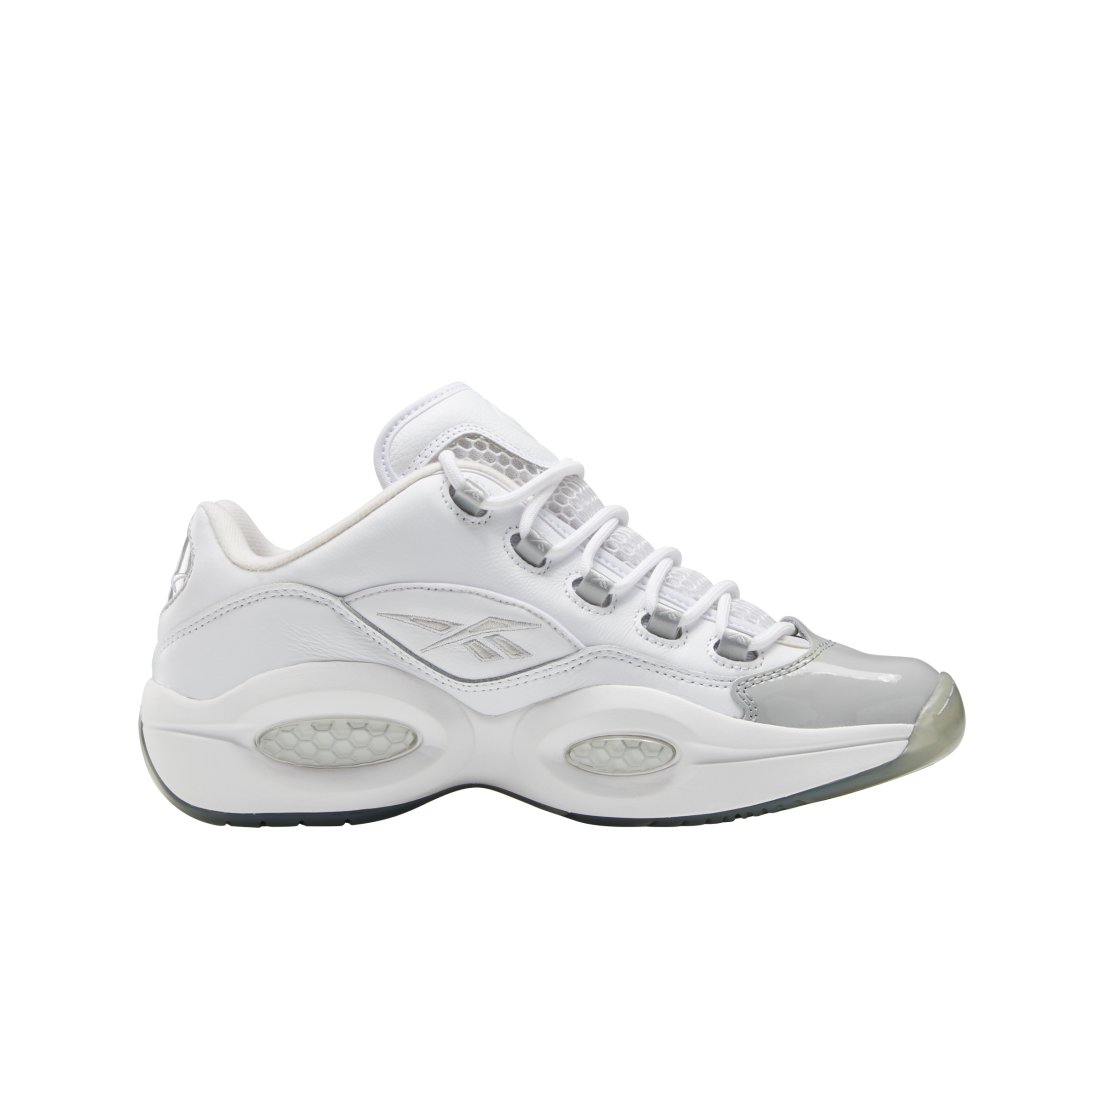 Reebok To Bring Back Allen Iverson’s Classic “Question Low” Sneakers ...